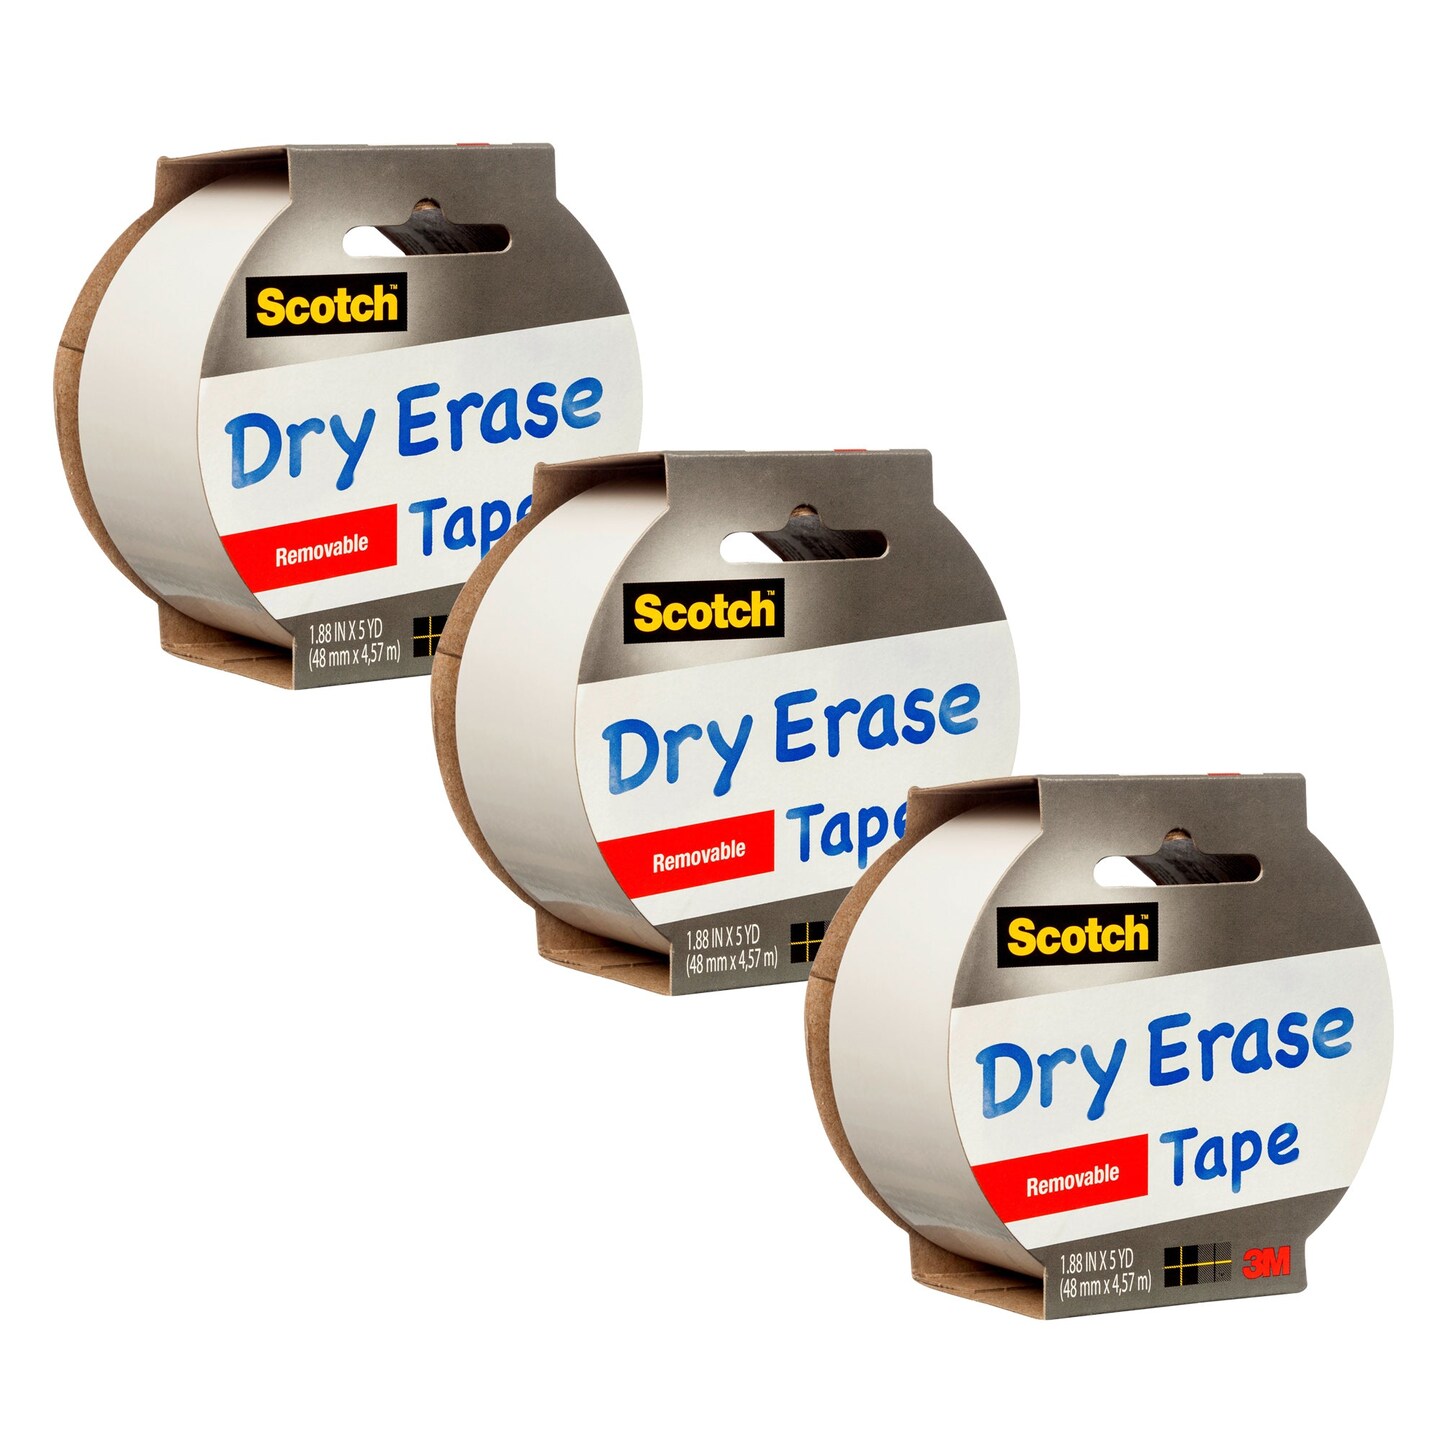 Dry Erase Tape, 1.88 x 5yd, Pack of 3